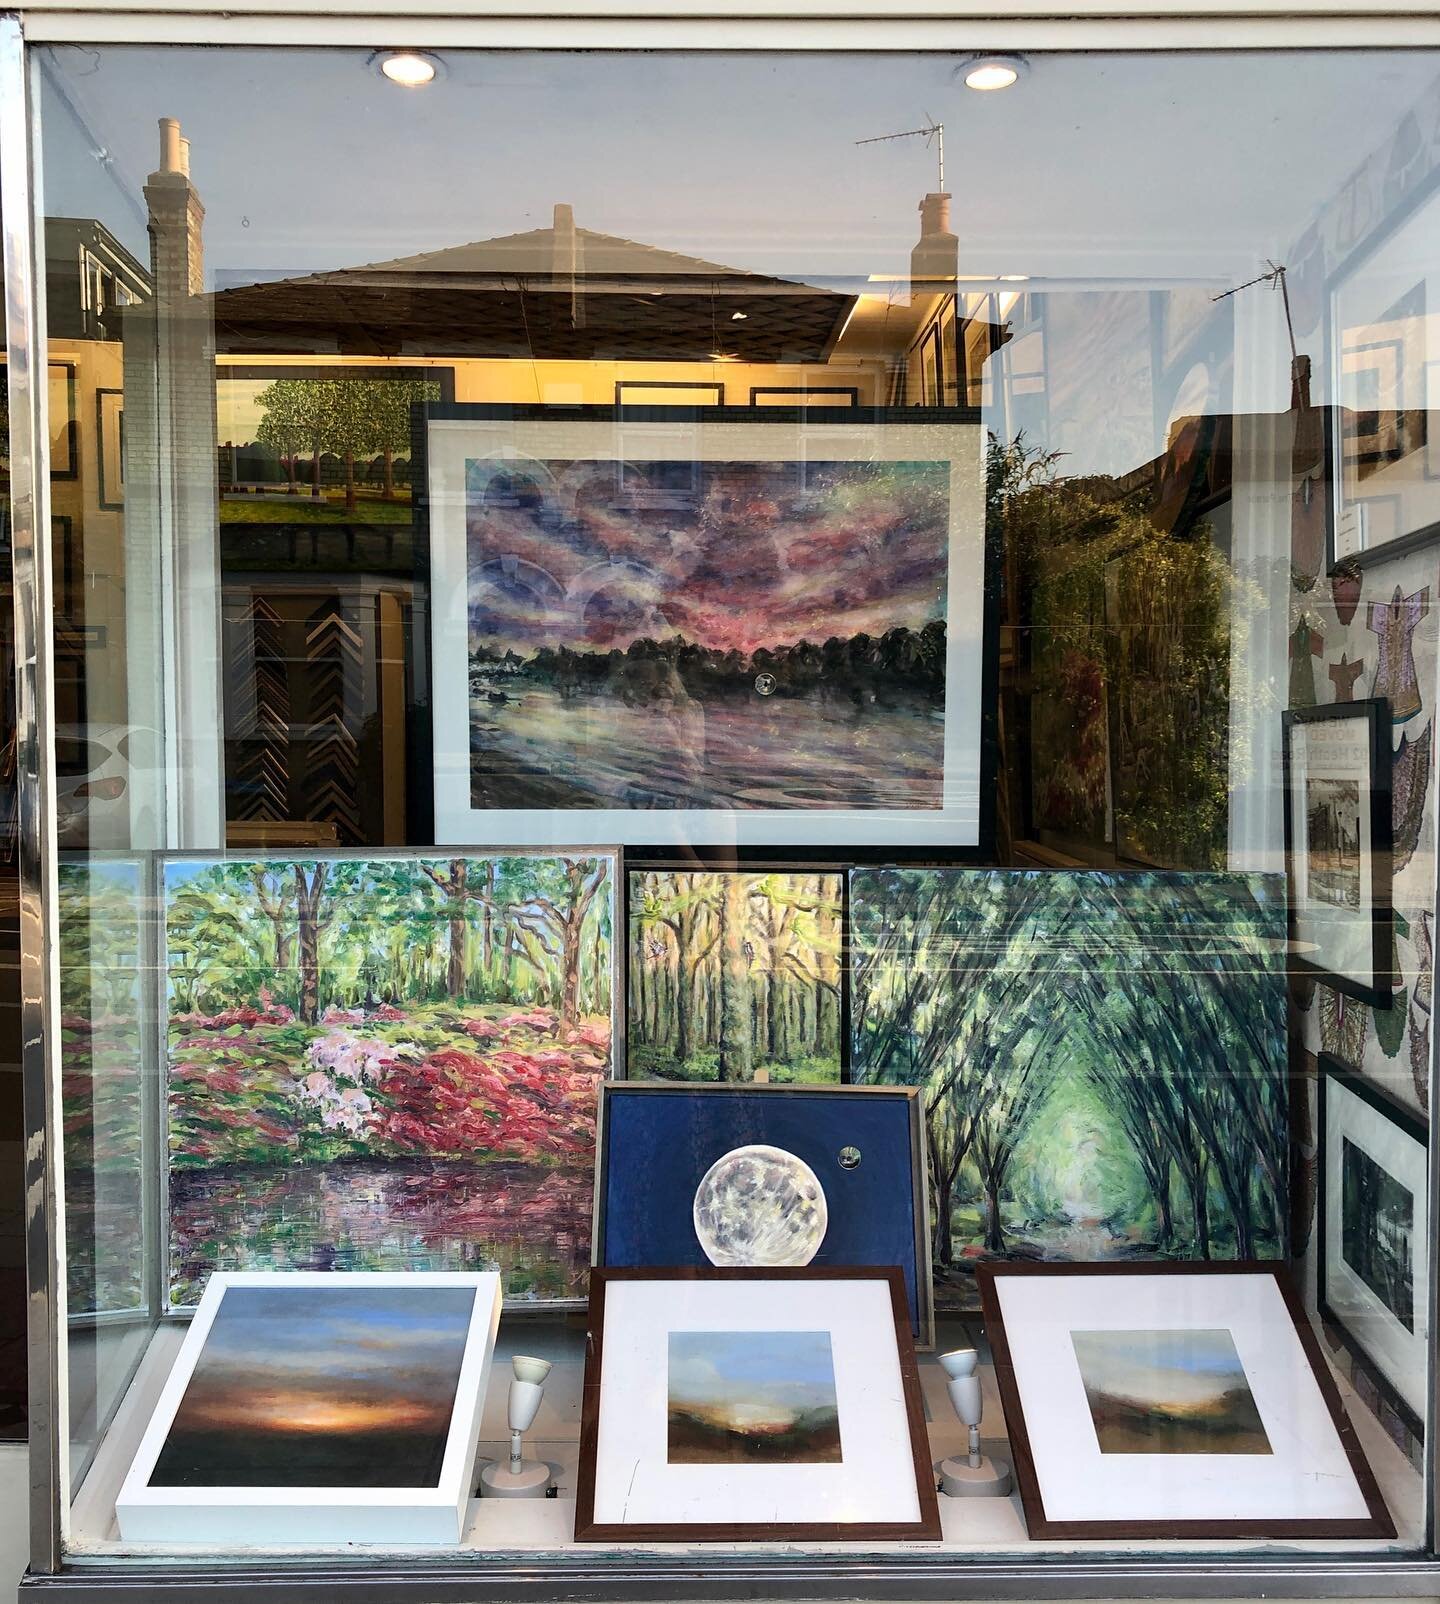 &ldquo;Isabella Plantation&rdquo; oil painting 60x60 cm by @doinamoss with signature silver gilded inner shadow frame, reflecting the light, adding radiance from within, is finally installed at the @leighgalleryuk. Part of the premiere are the &ldquo